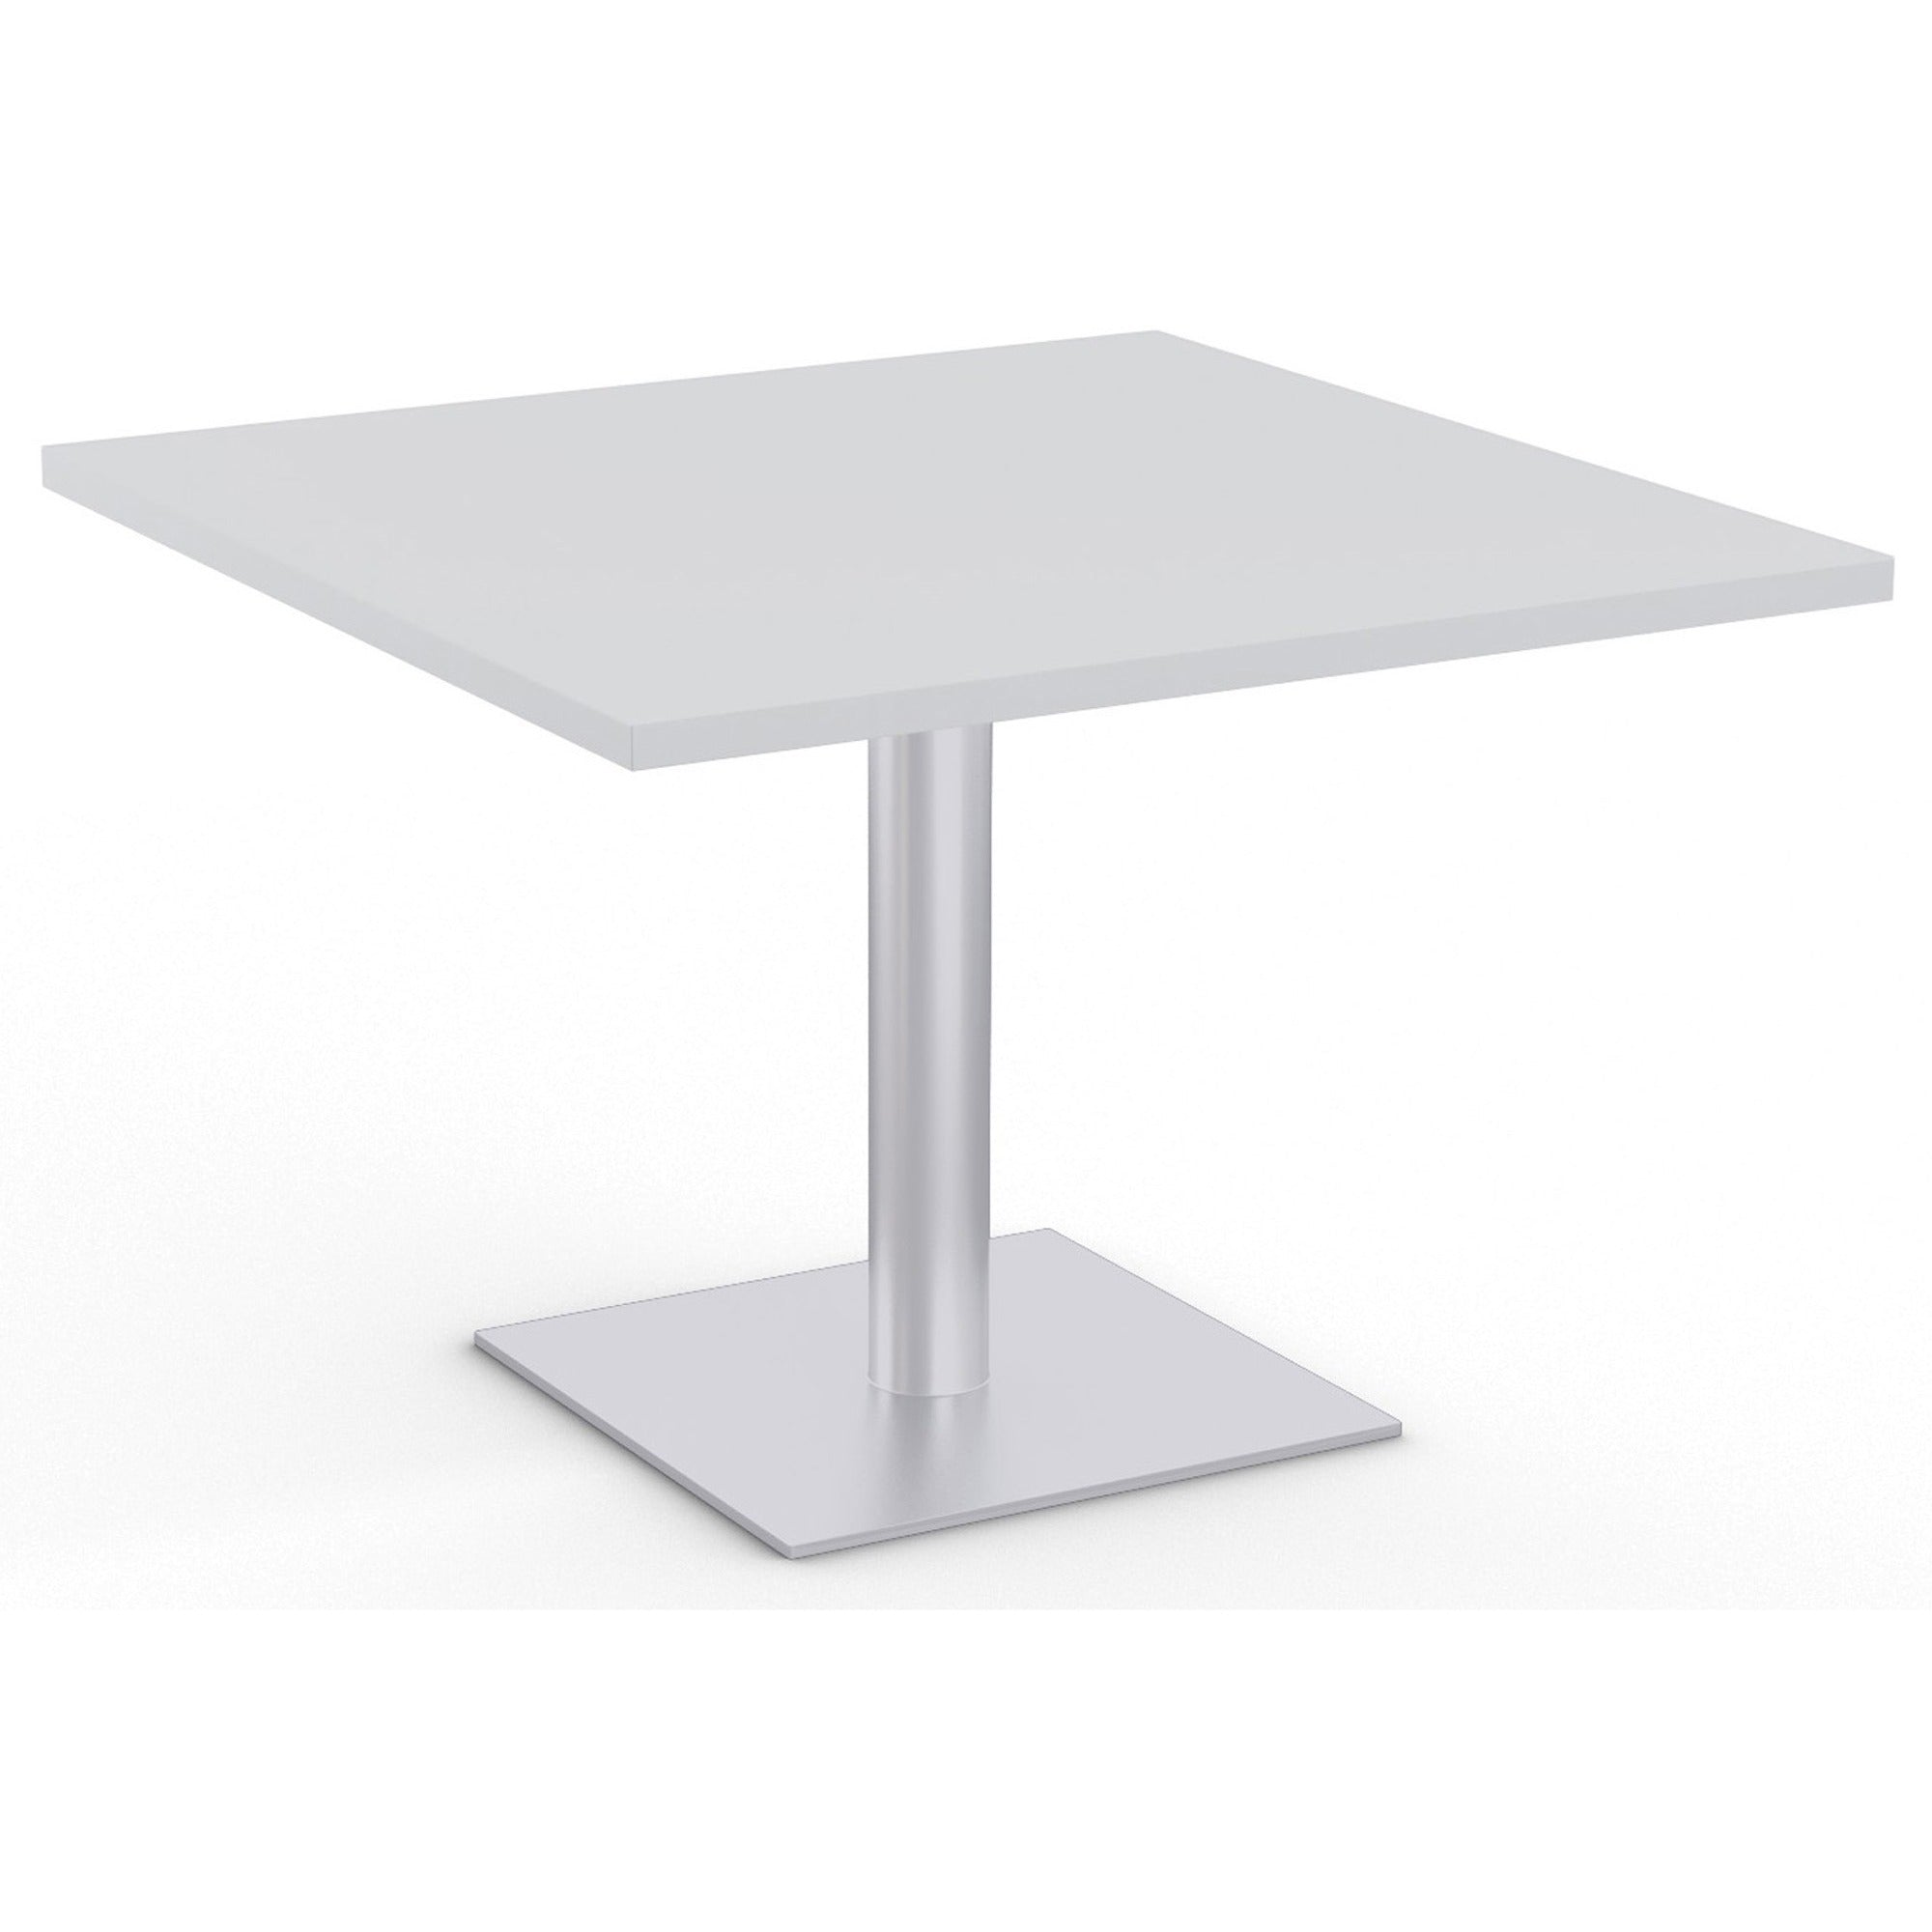 special-t-sienna-hospitality-table-for-table-tophigh-pressure-laminate-hpl-square-top-powder-coated-base-x-42-table-top-width-x-42-table-top-depth-x-125-table-top-thickness-29-height-assembly-required-fashion-gray-1-each_sctsien4242fg - 1